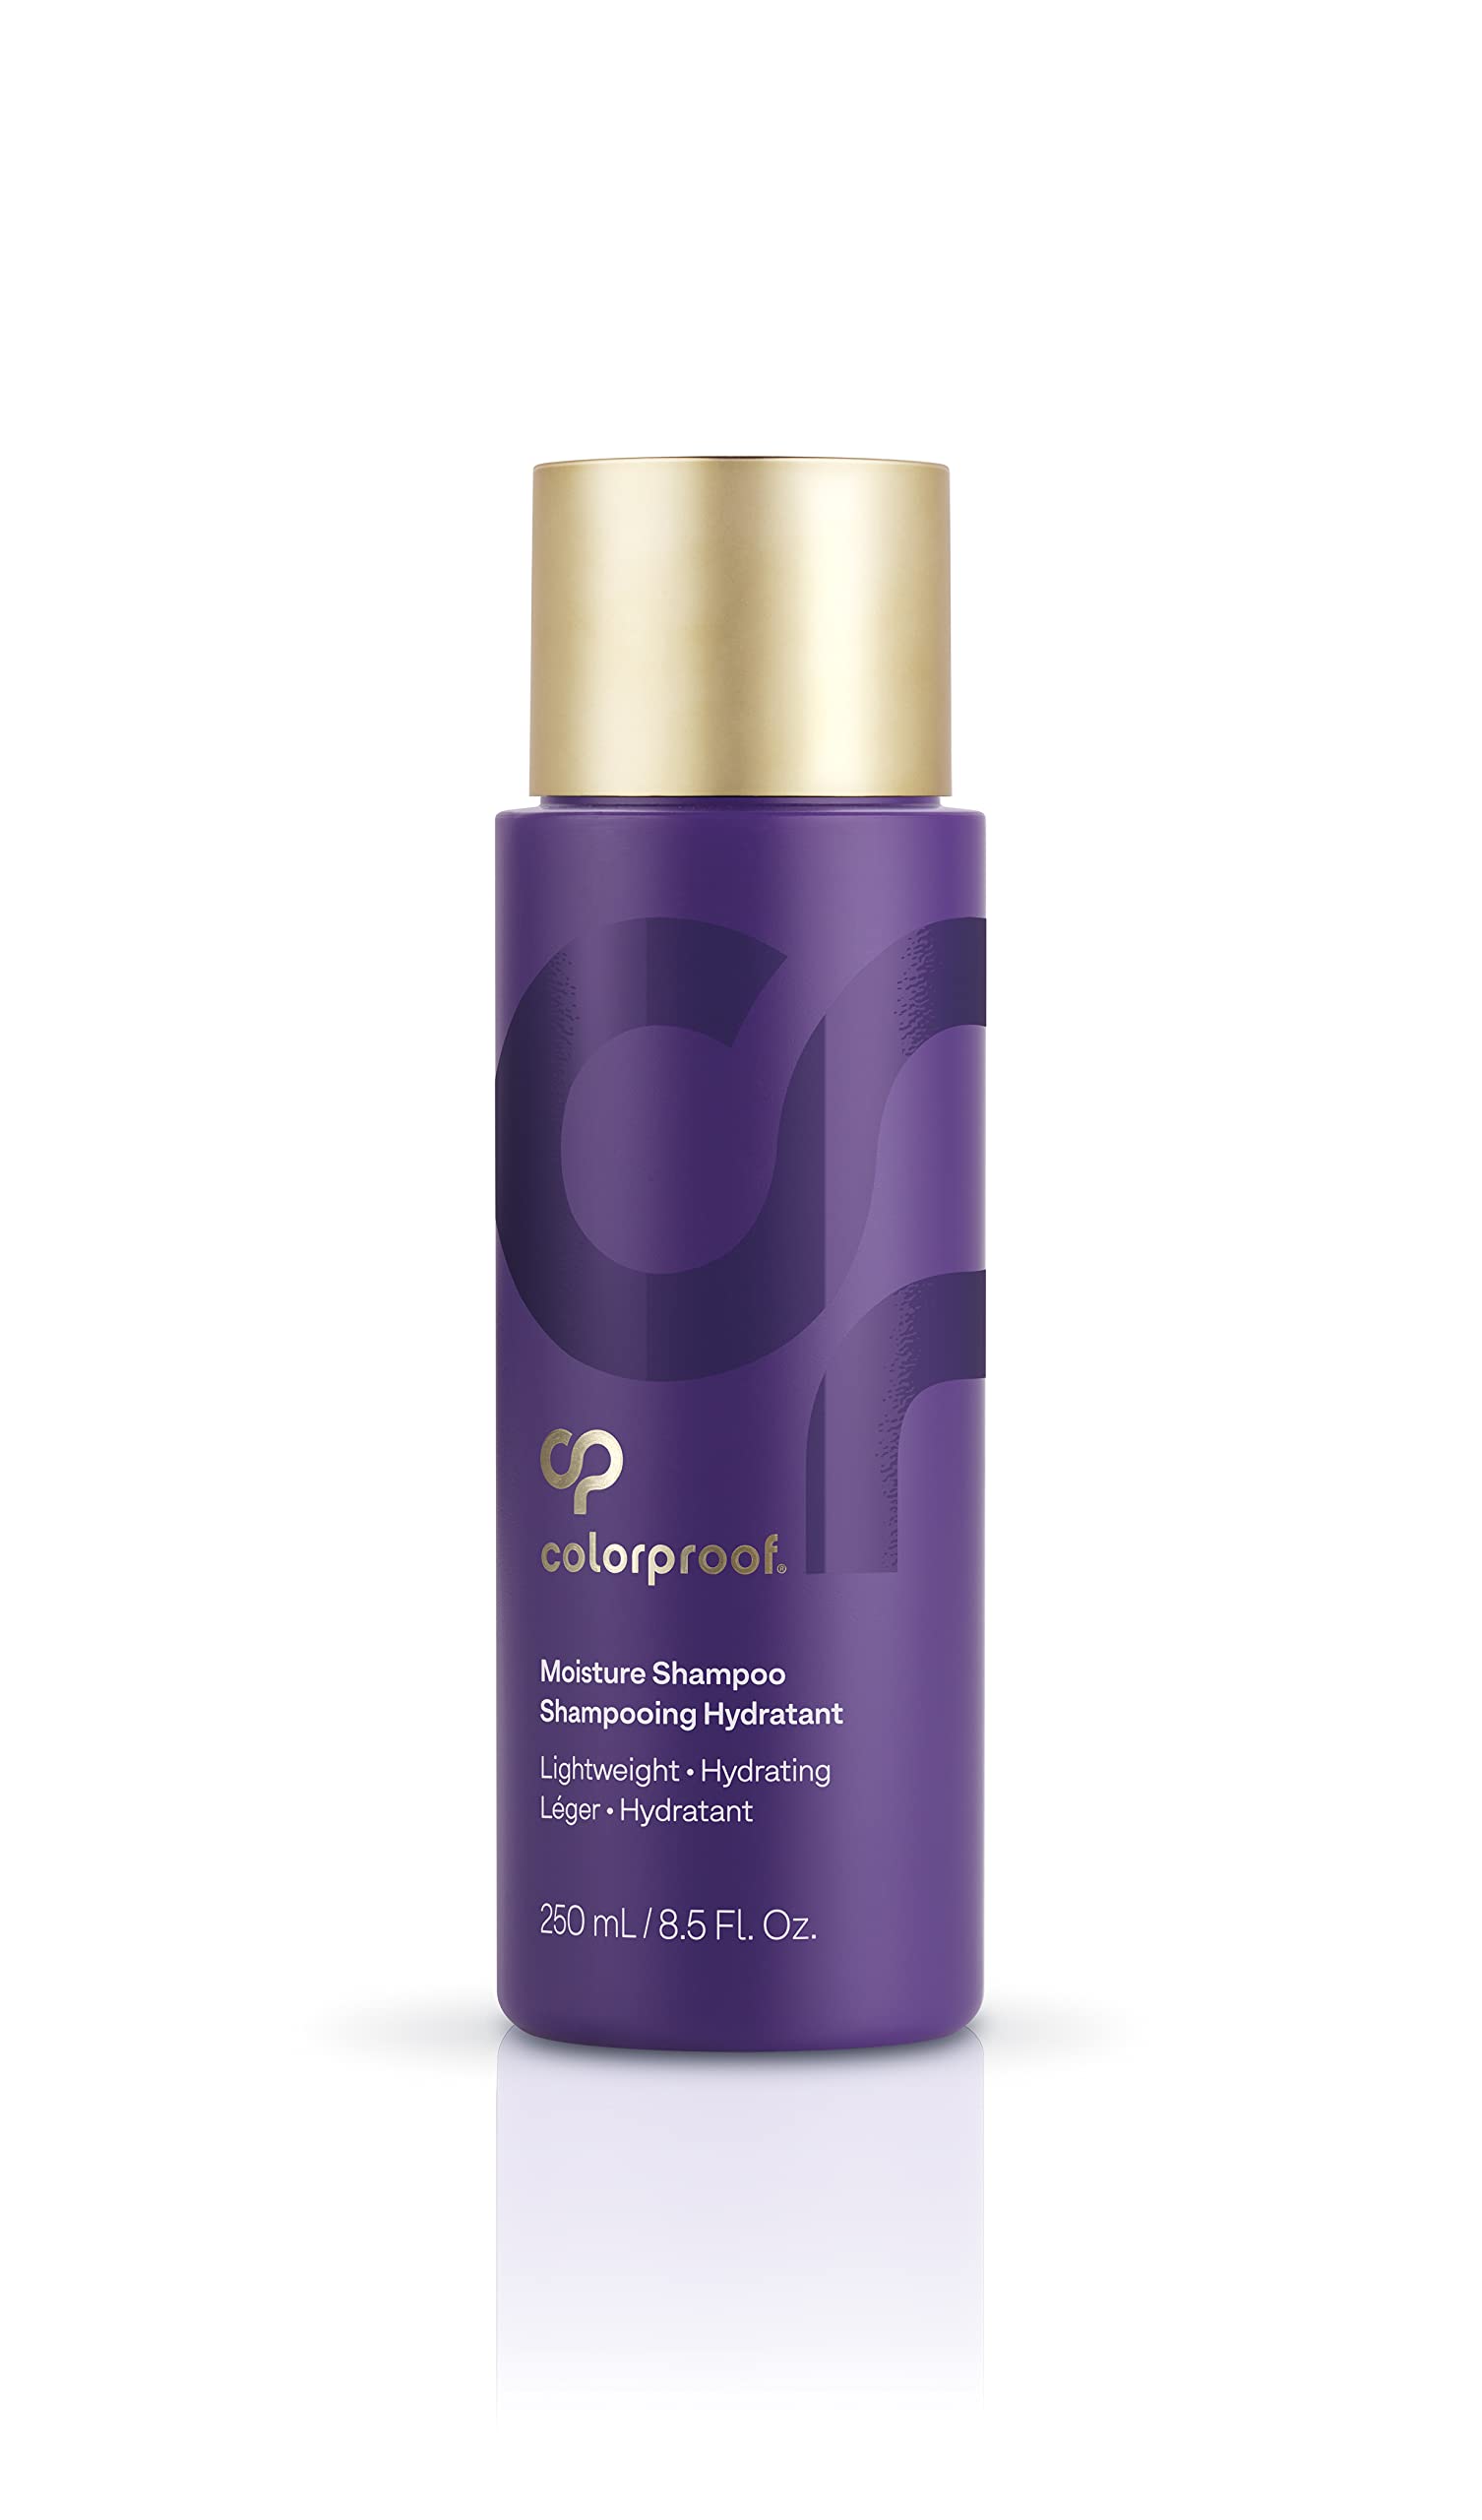 Colorproof Moisture Shampoo - For Dry Color-Treated Hair, Hydrates & Repairs, Sulfate-Free, Vega